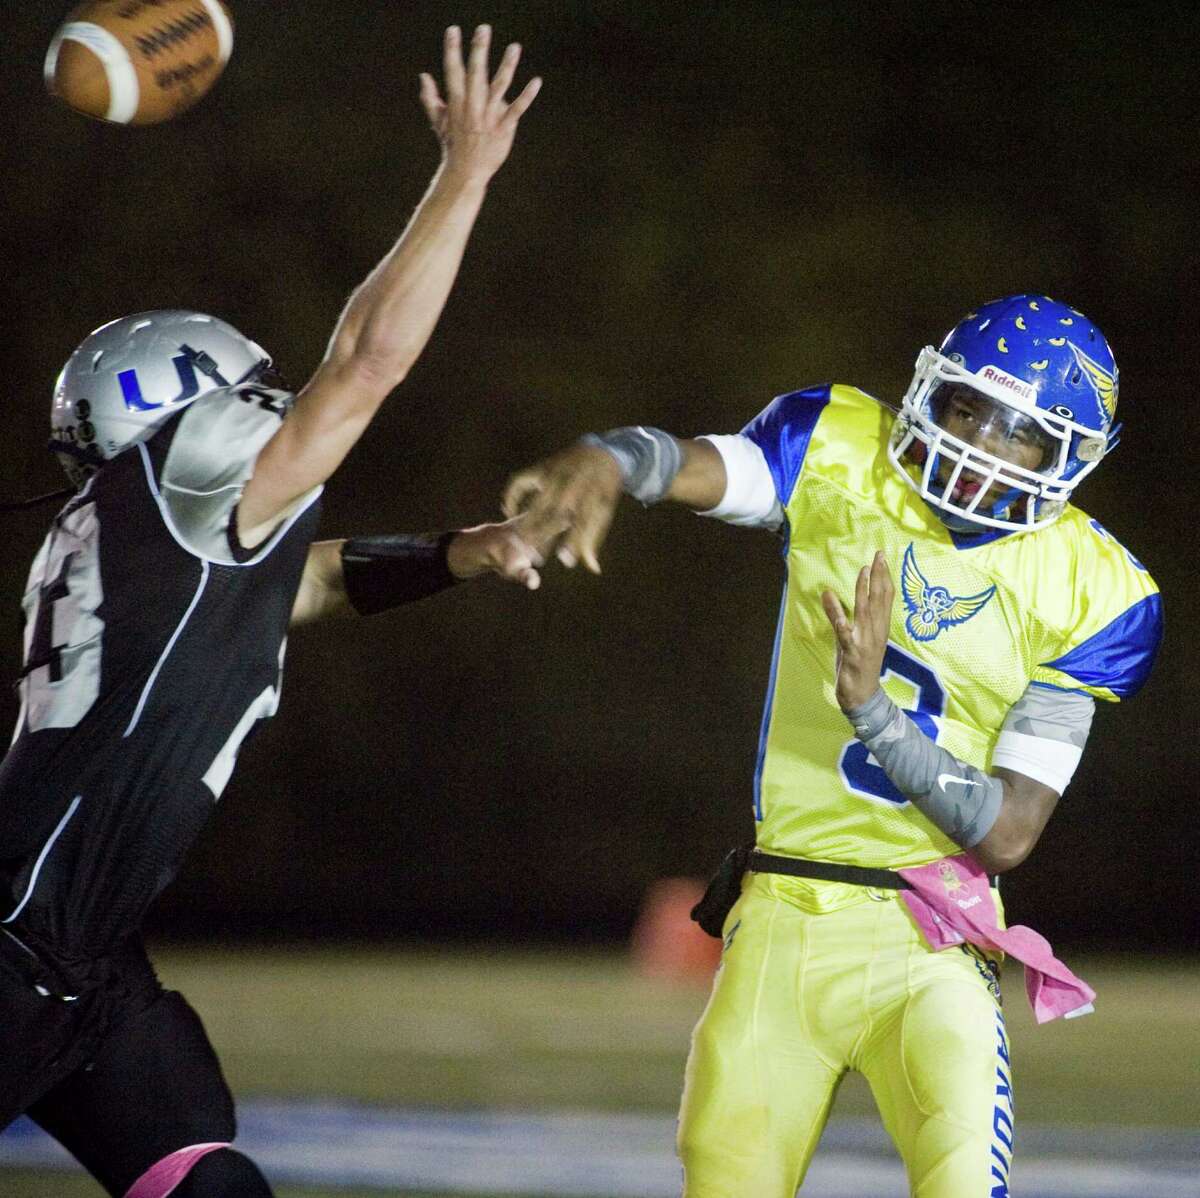 Harding quarterback Taisun Phommachanh has passed for 2,277 yards and 30 touchdowns with only three interceptions.